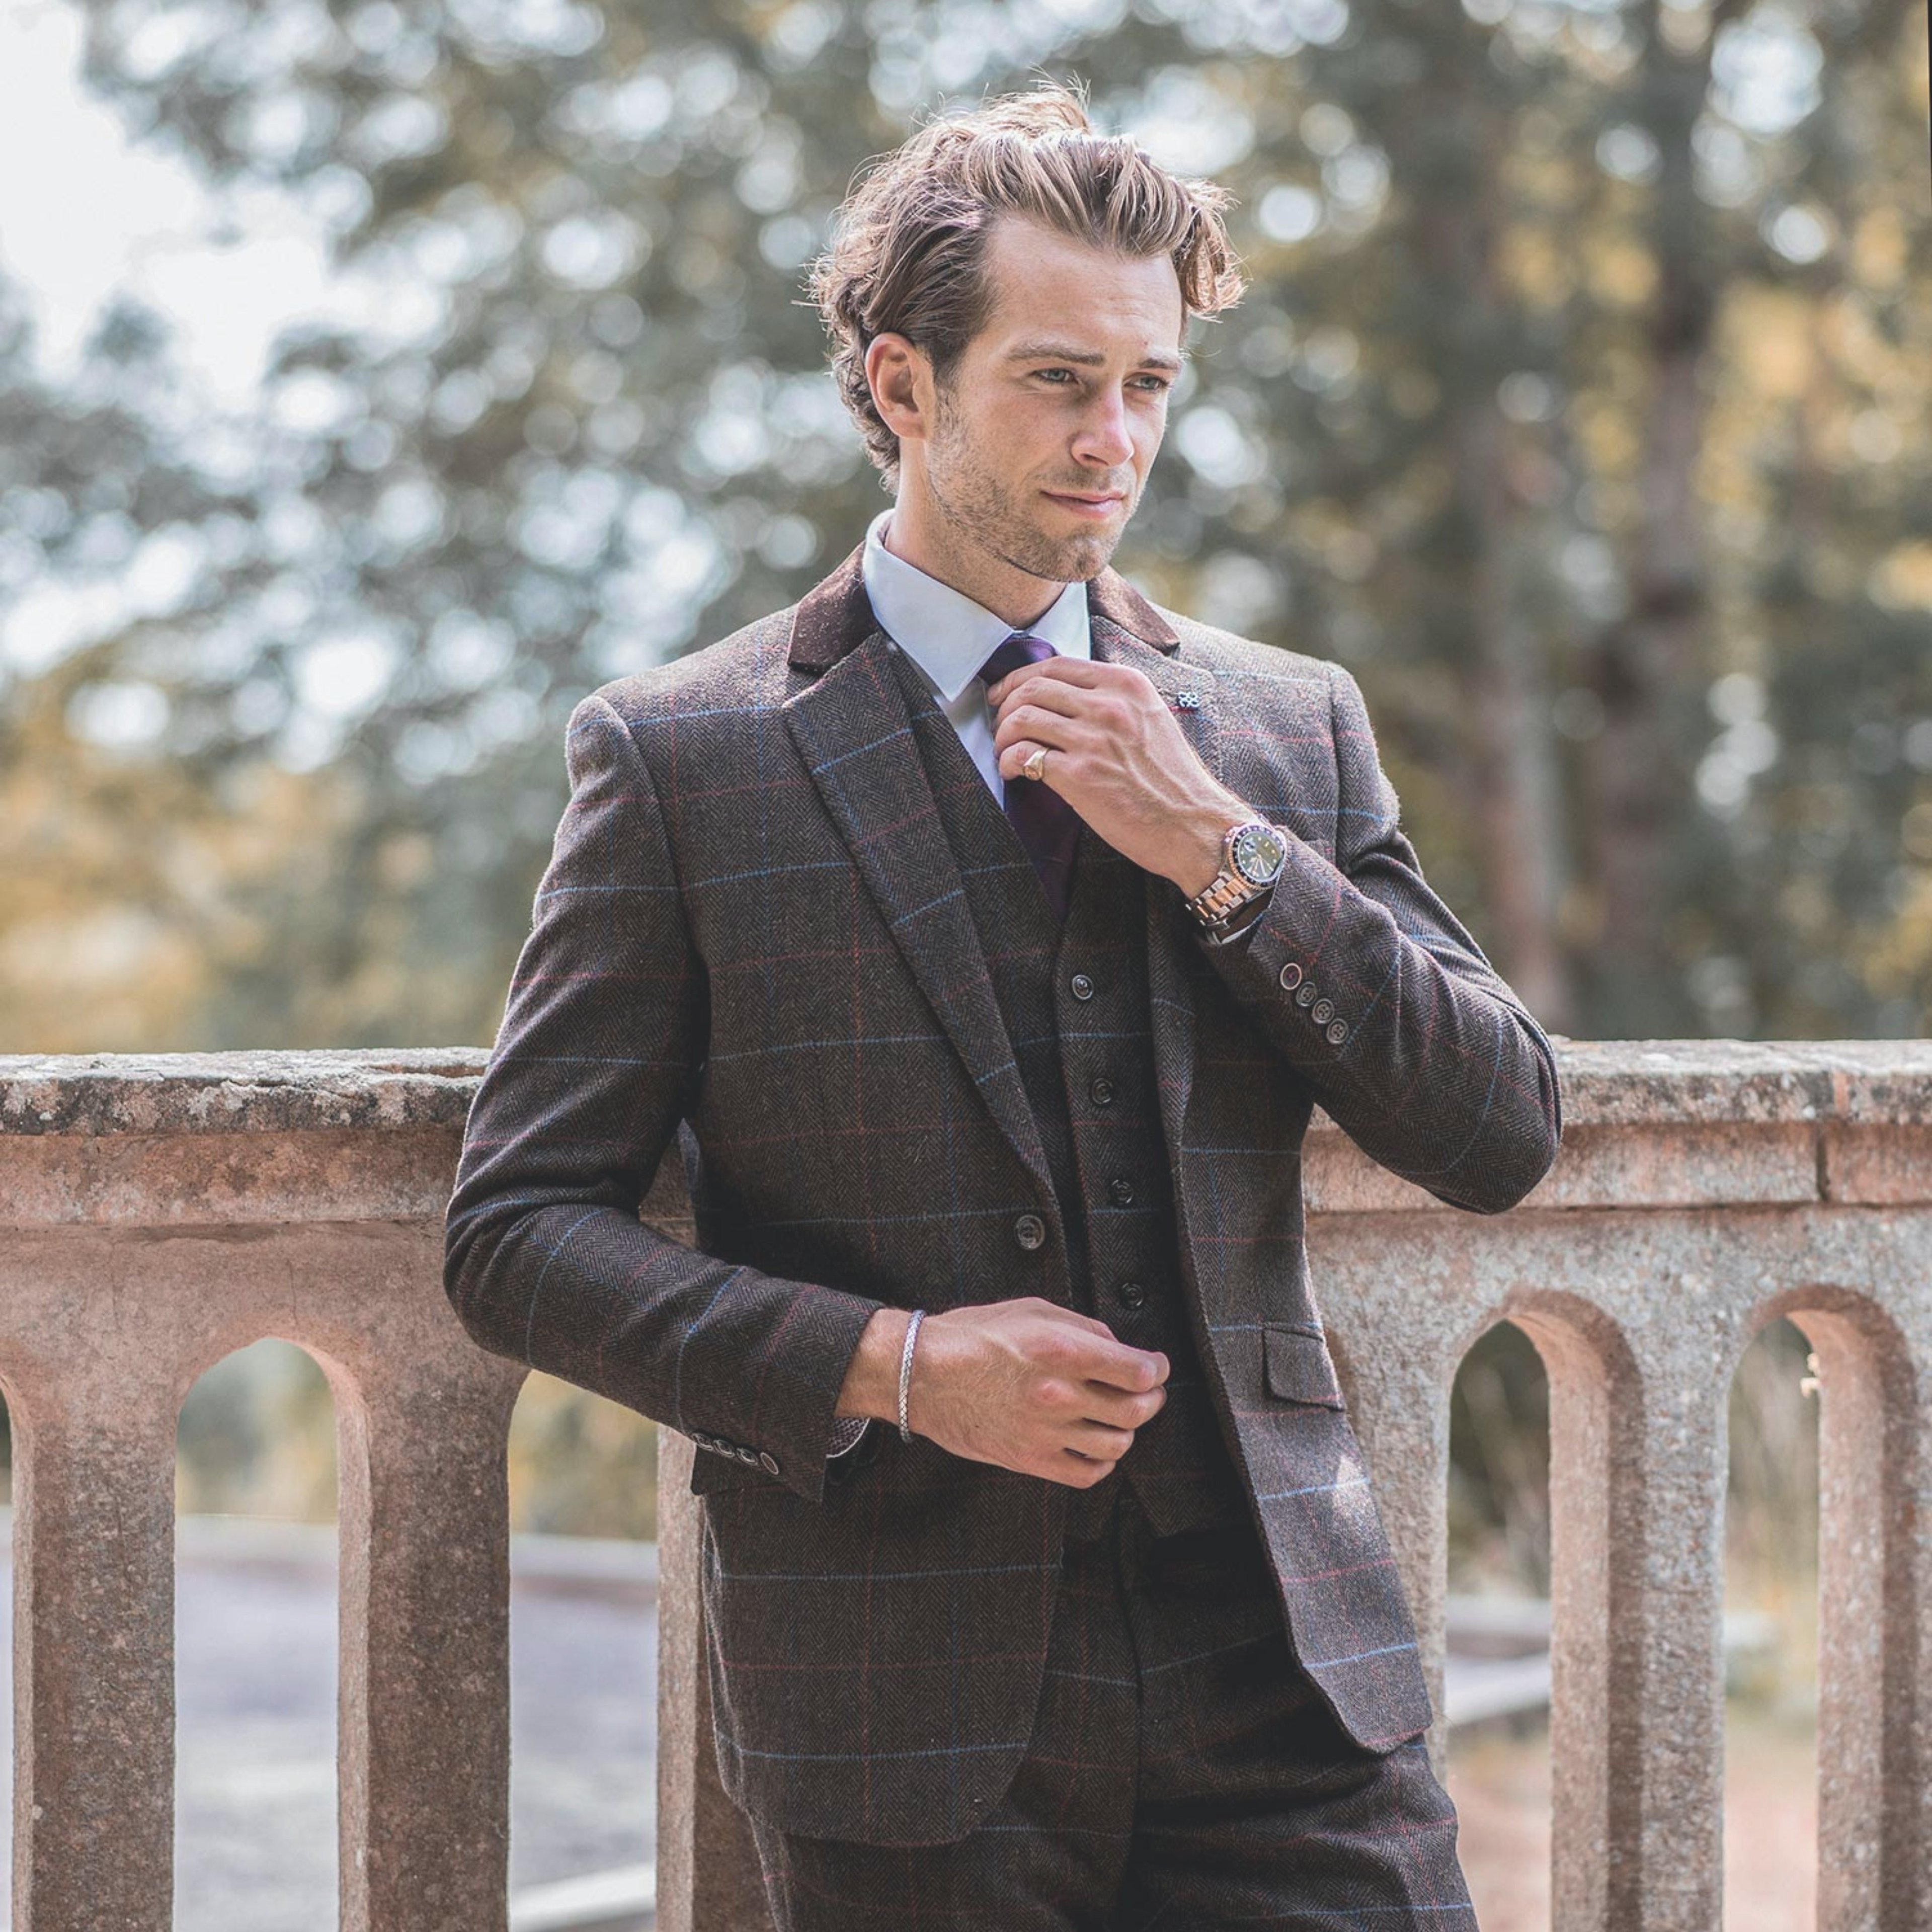 A Guide to the Different Types of Men's Suits From Classic to Modern